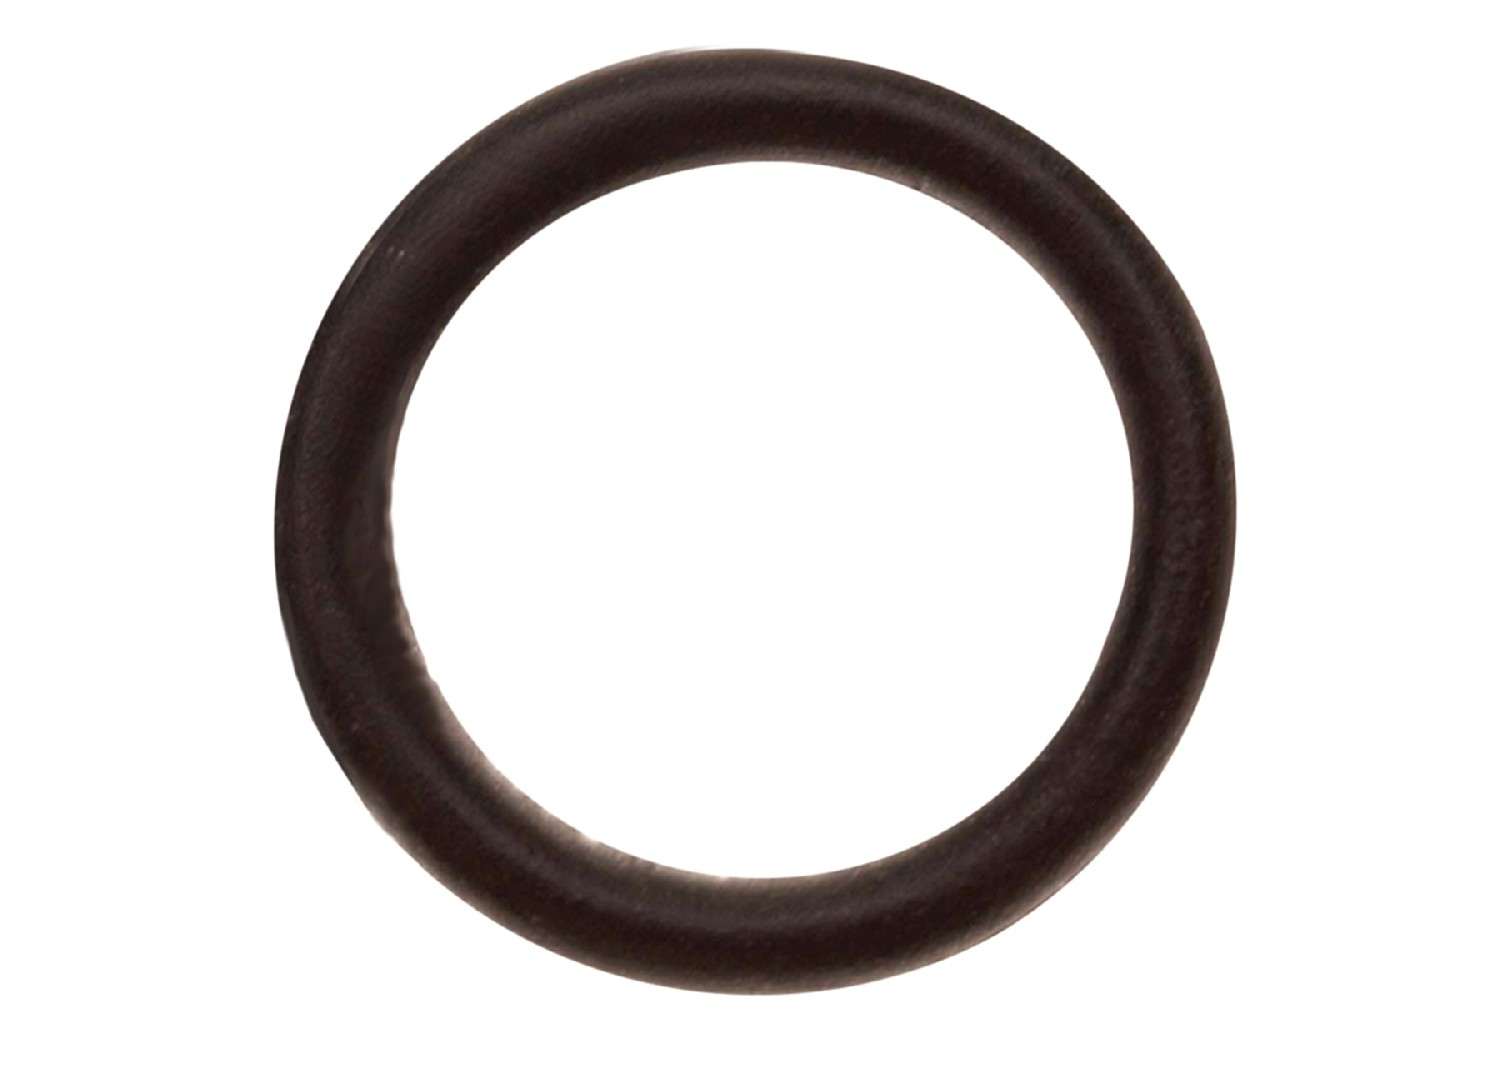 GM GENUINE PARTS - Automatic Transmission Throttle Valve Cable Seal - GMP 463015